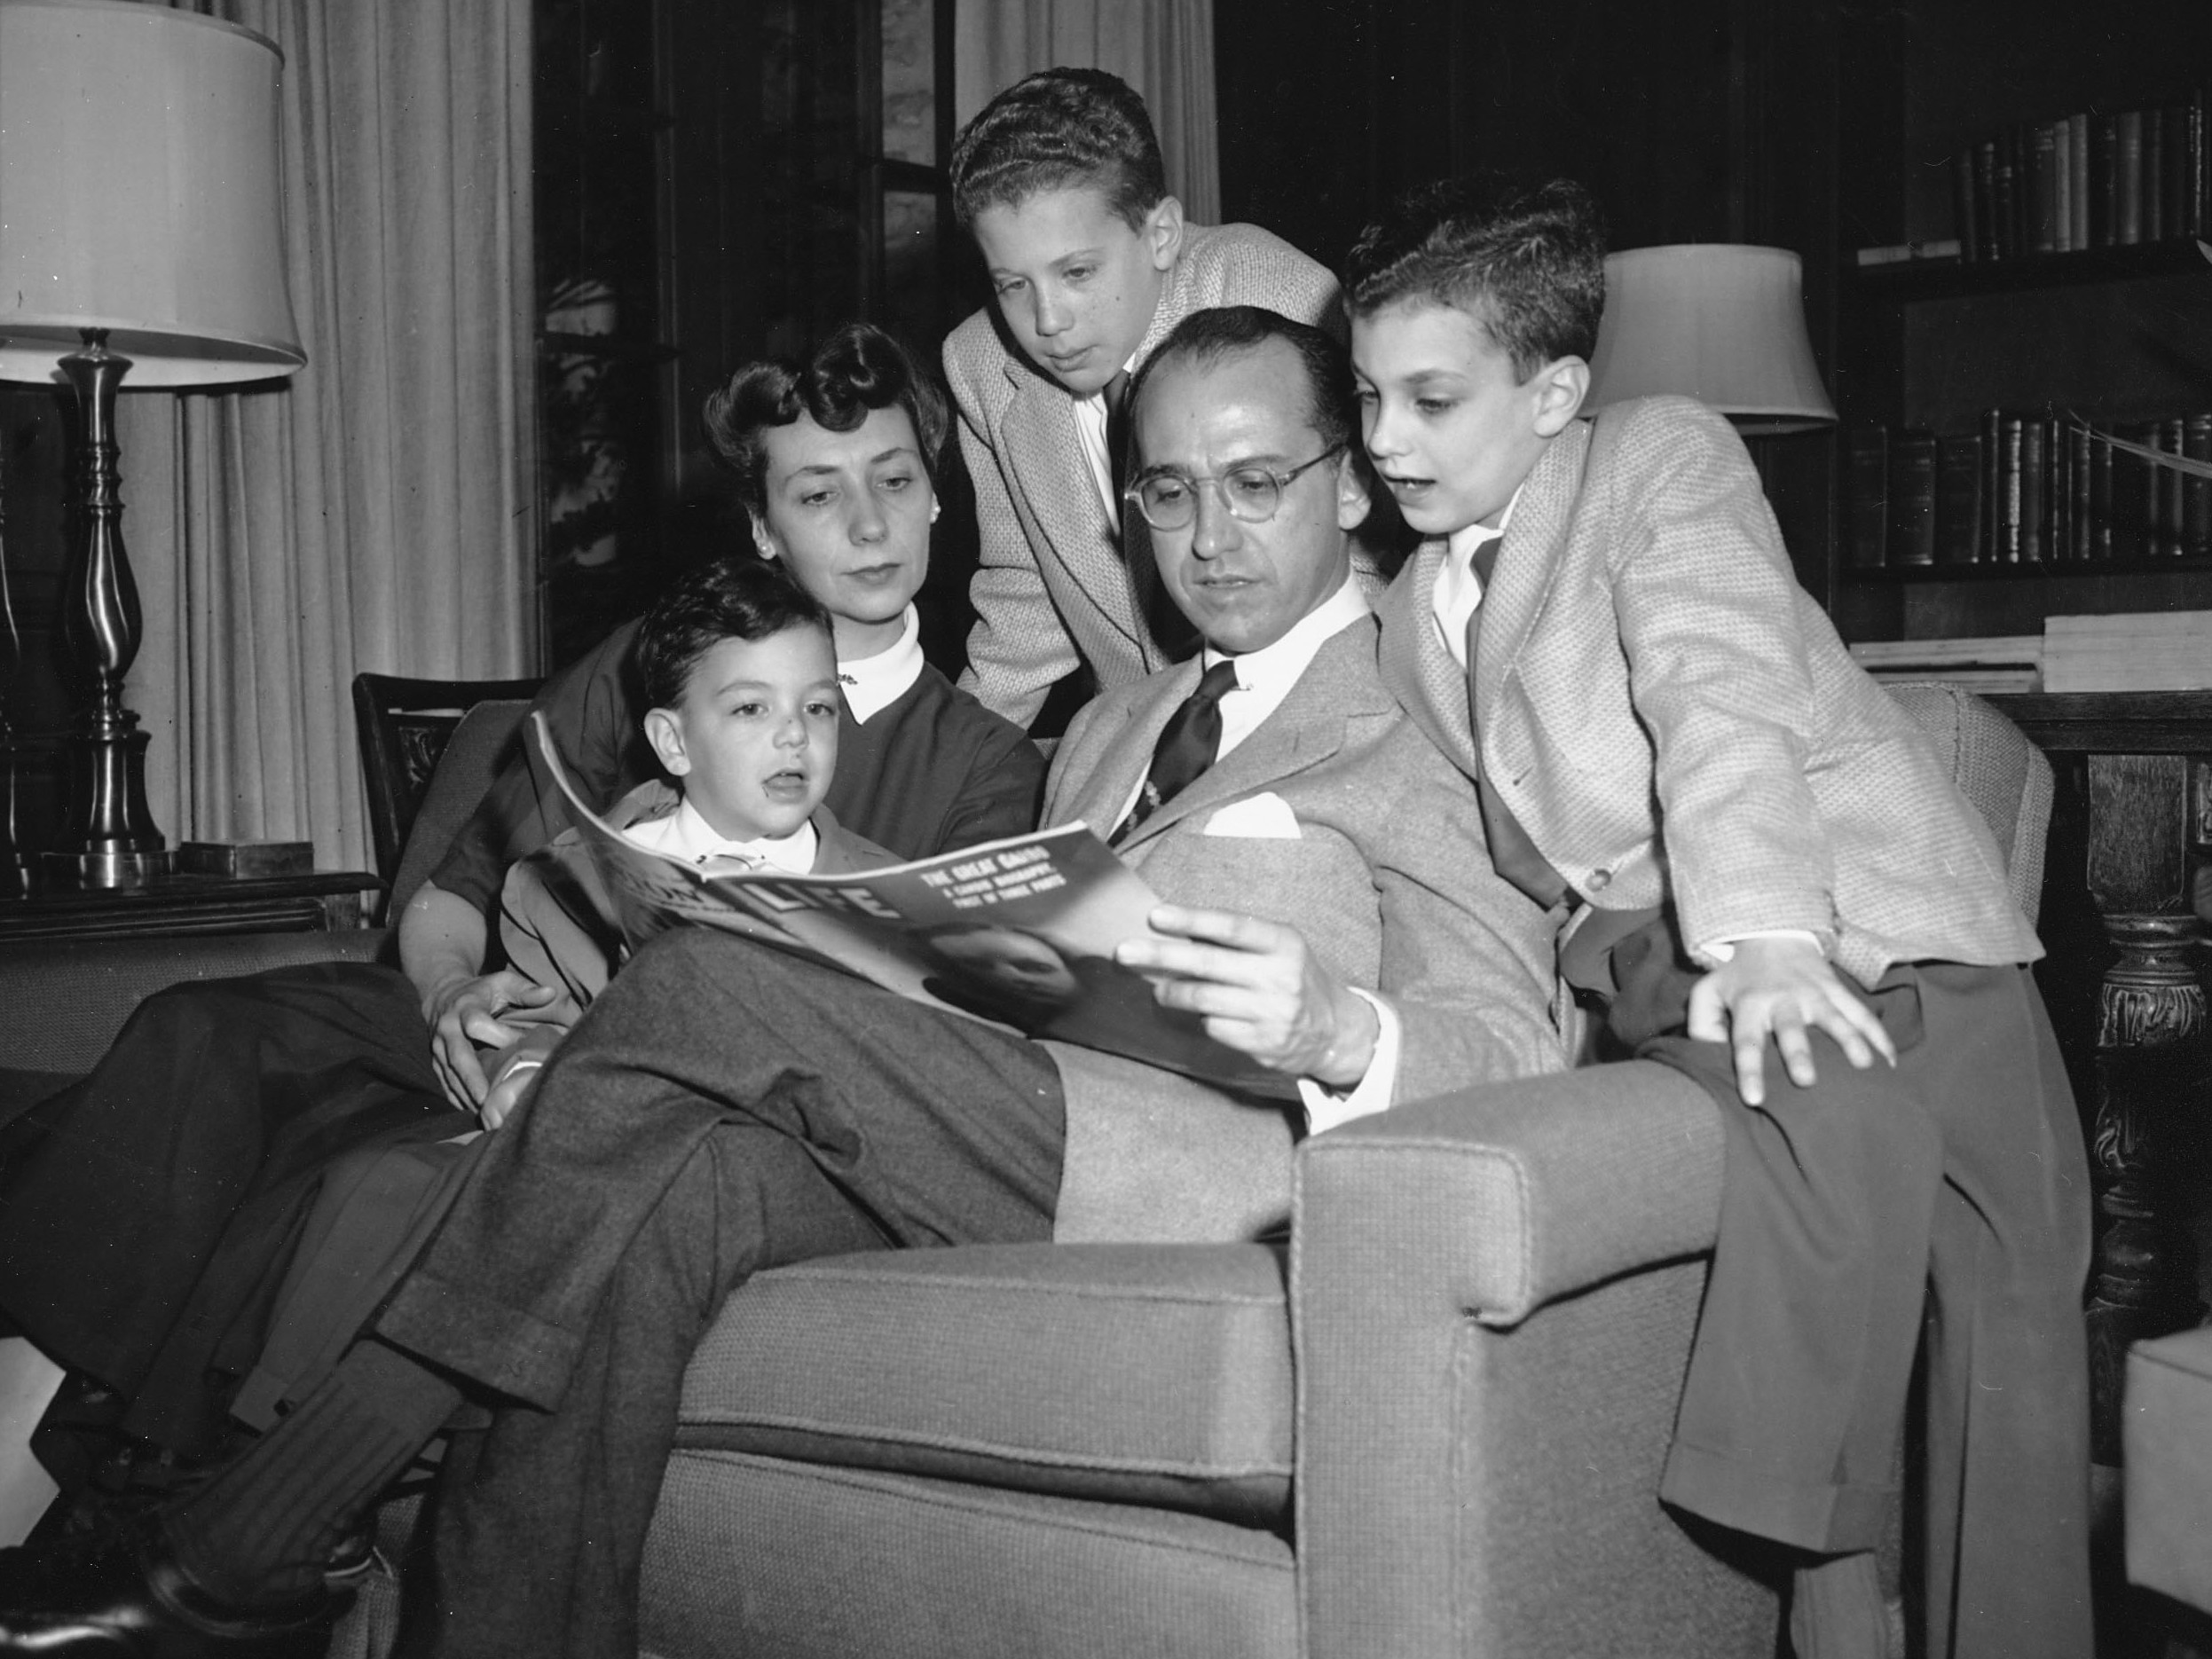 Dr. Jonas E. Salk, who discovered the polio vaccine, reads with his wife and three boys in Ann Arbor, Mich., on April 11, 1955. The boys were among the first vaccinated during testing. The family was photographed the night before an announcement the vaccine was effective. Pictured from left are Jonathan, 5; Donna Salk; Peter, 11; Salk; and Darrell, 8.